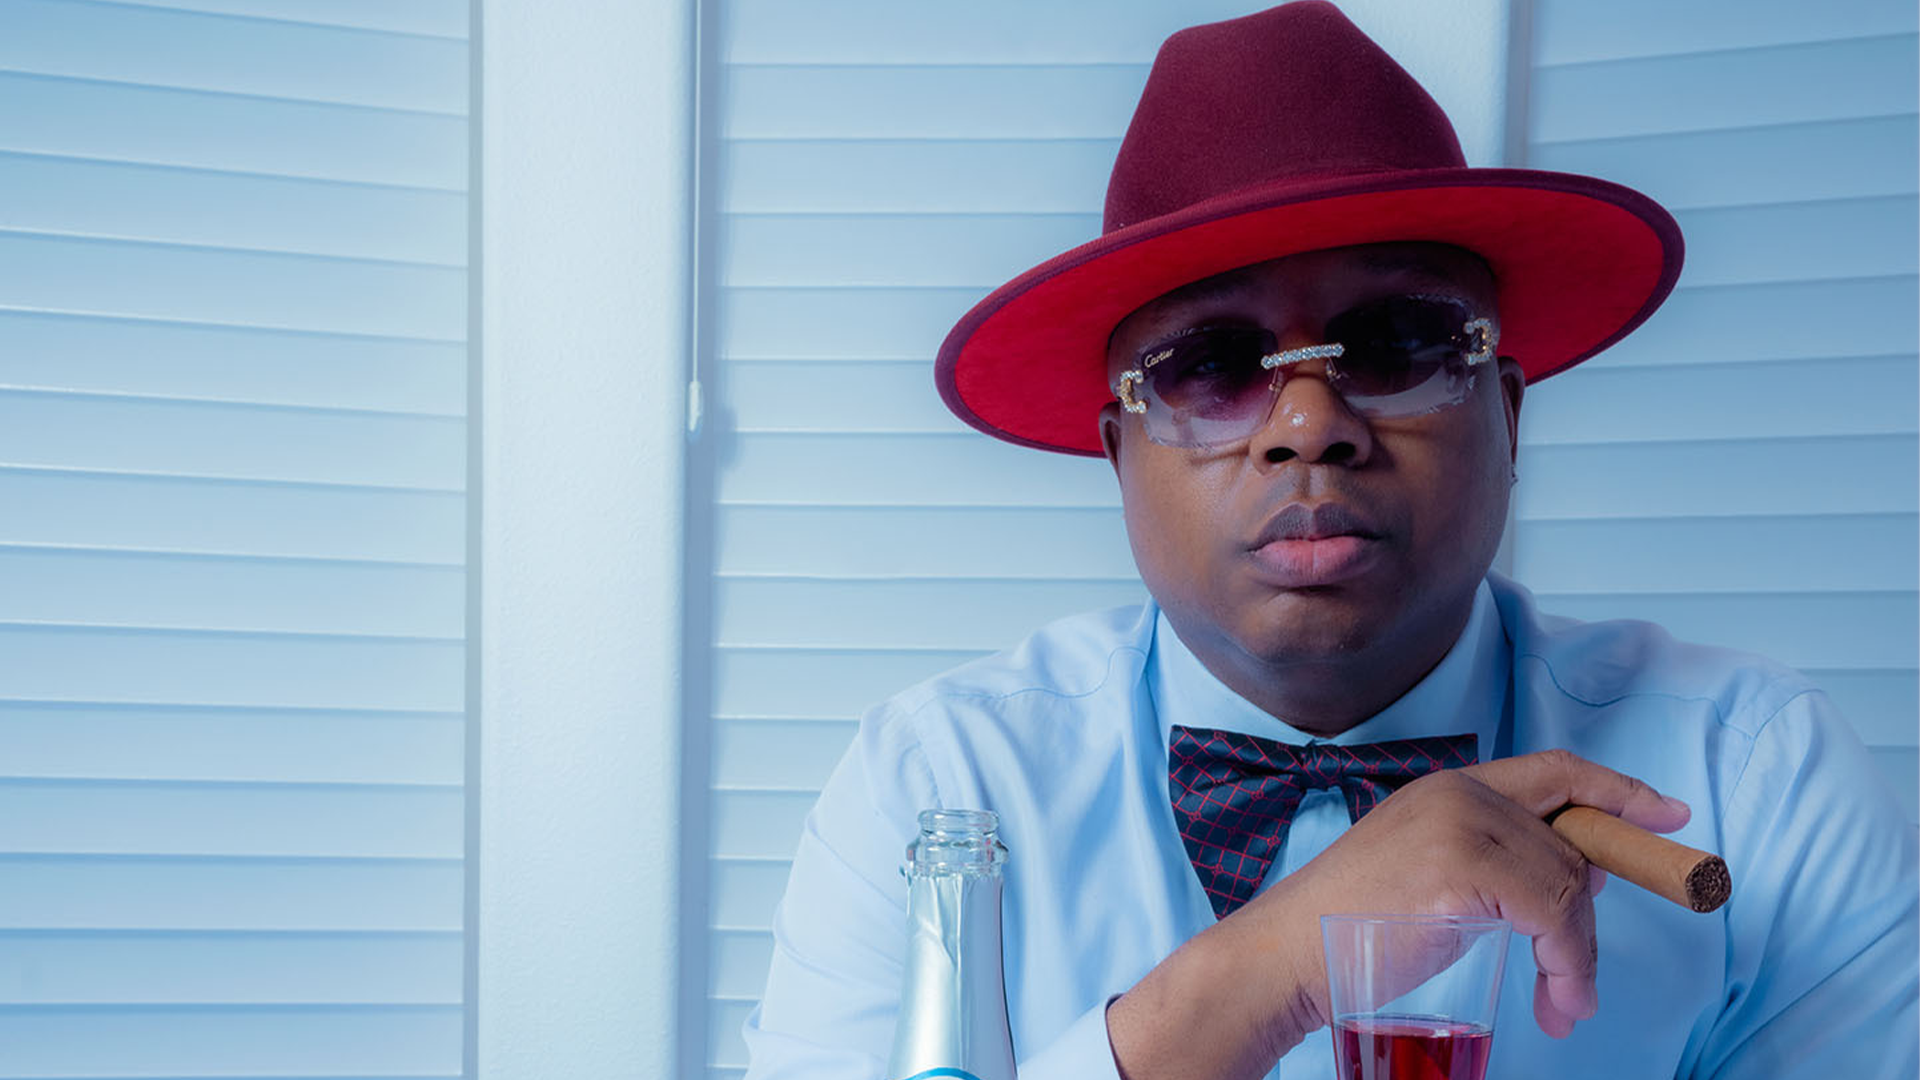 Exclusive: How E-40 Went From Rapper To What He Calls 'The Epitome Of Black-Owned Business' By Investing In Himself